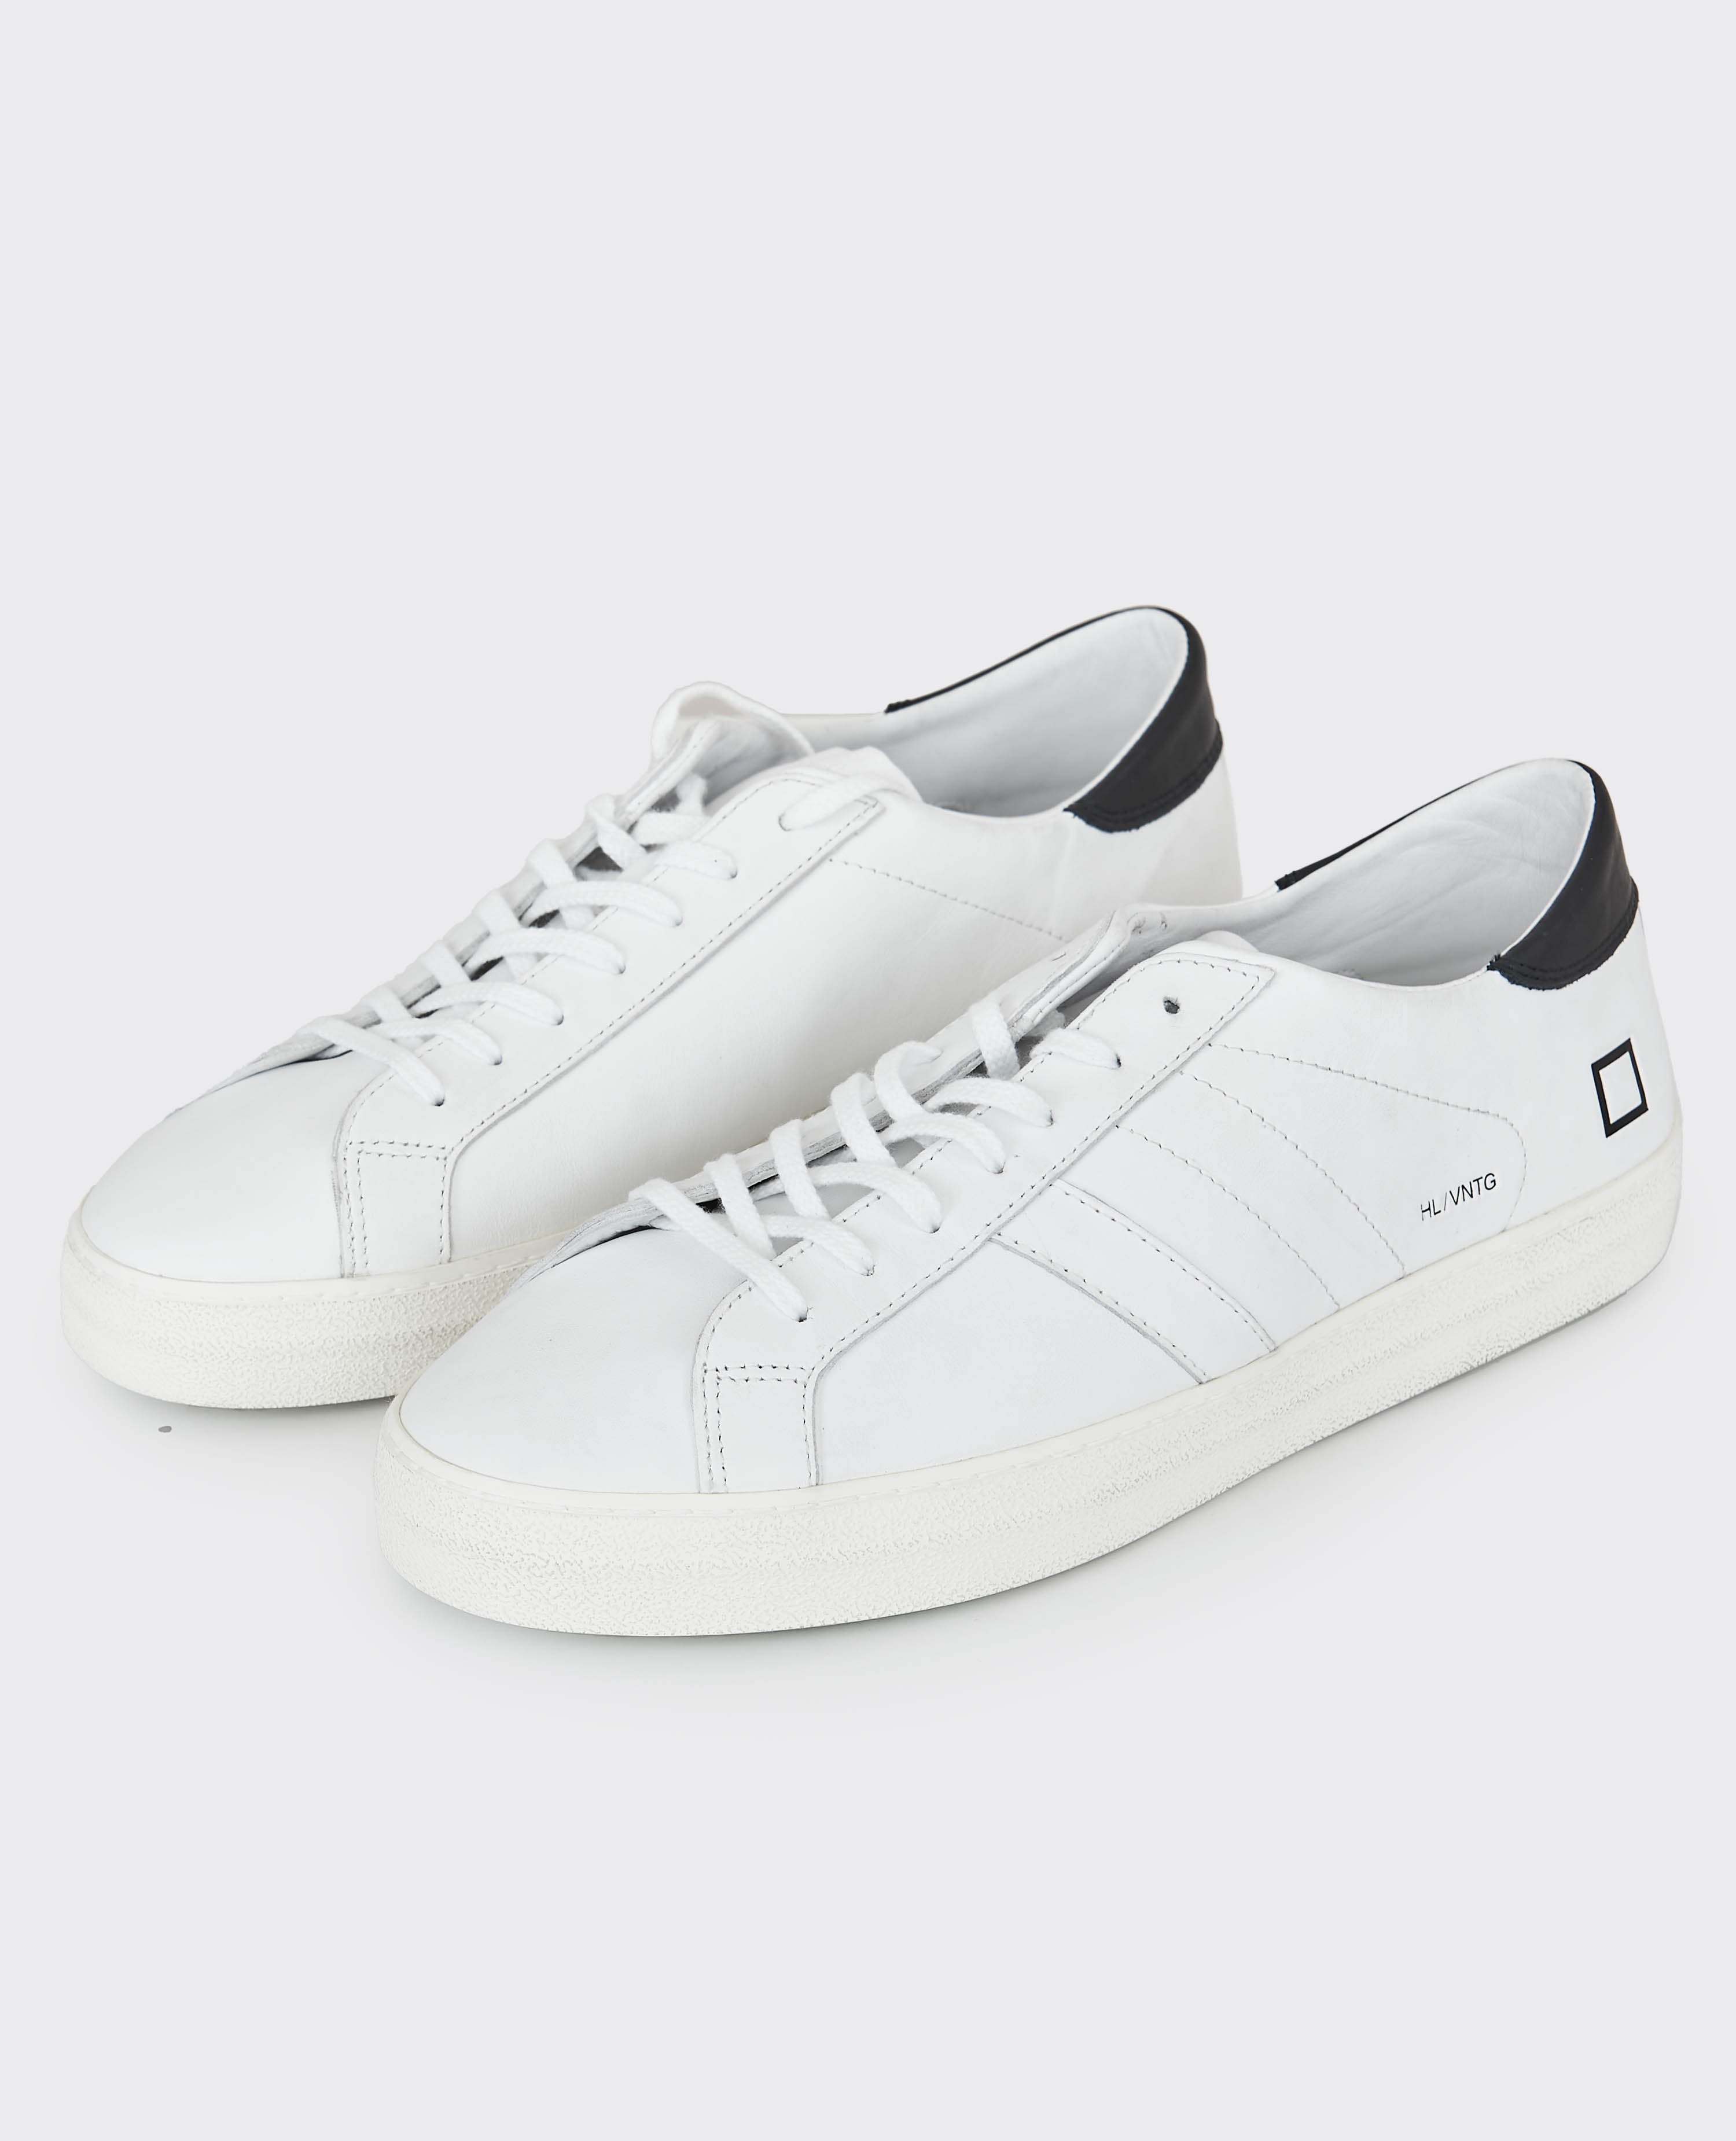 Sneakers DATE Hill Low Vintage Calf White - Black